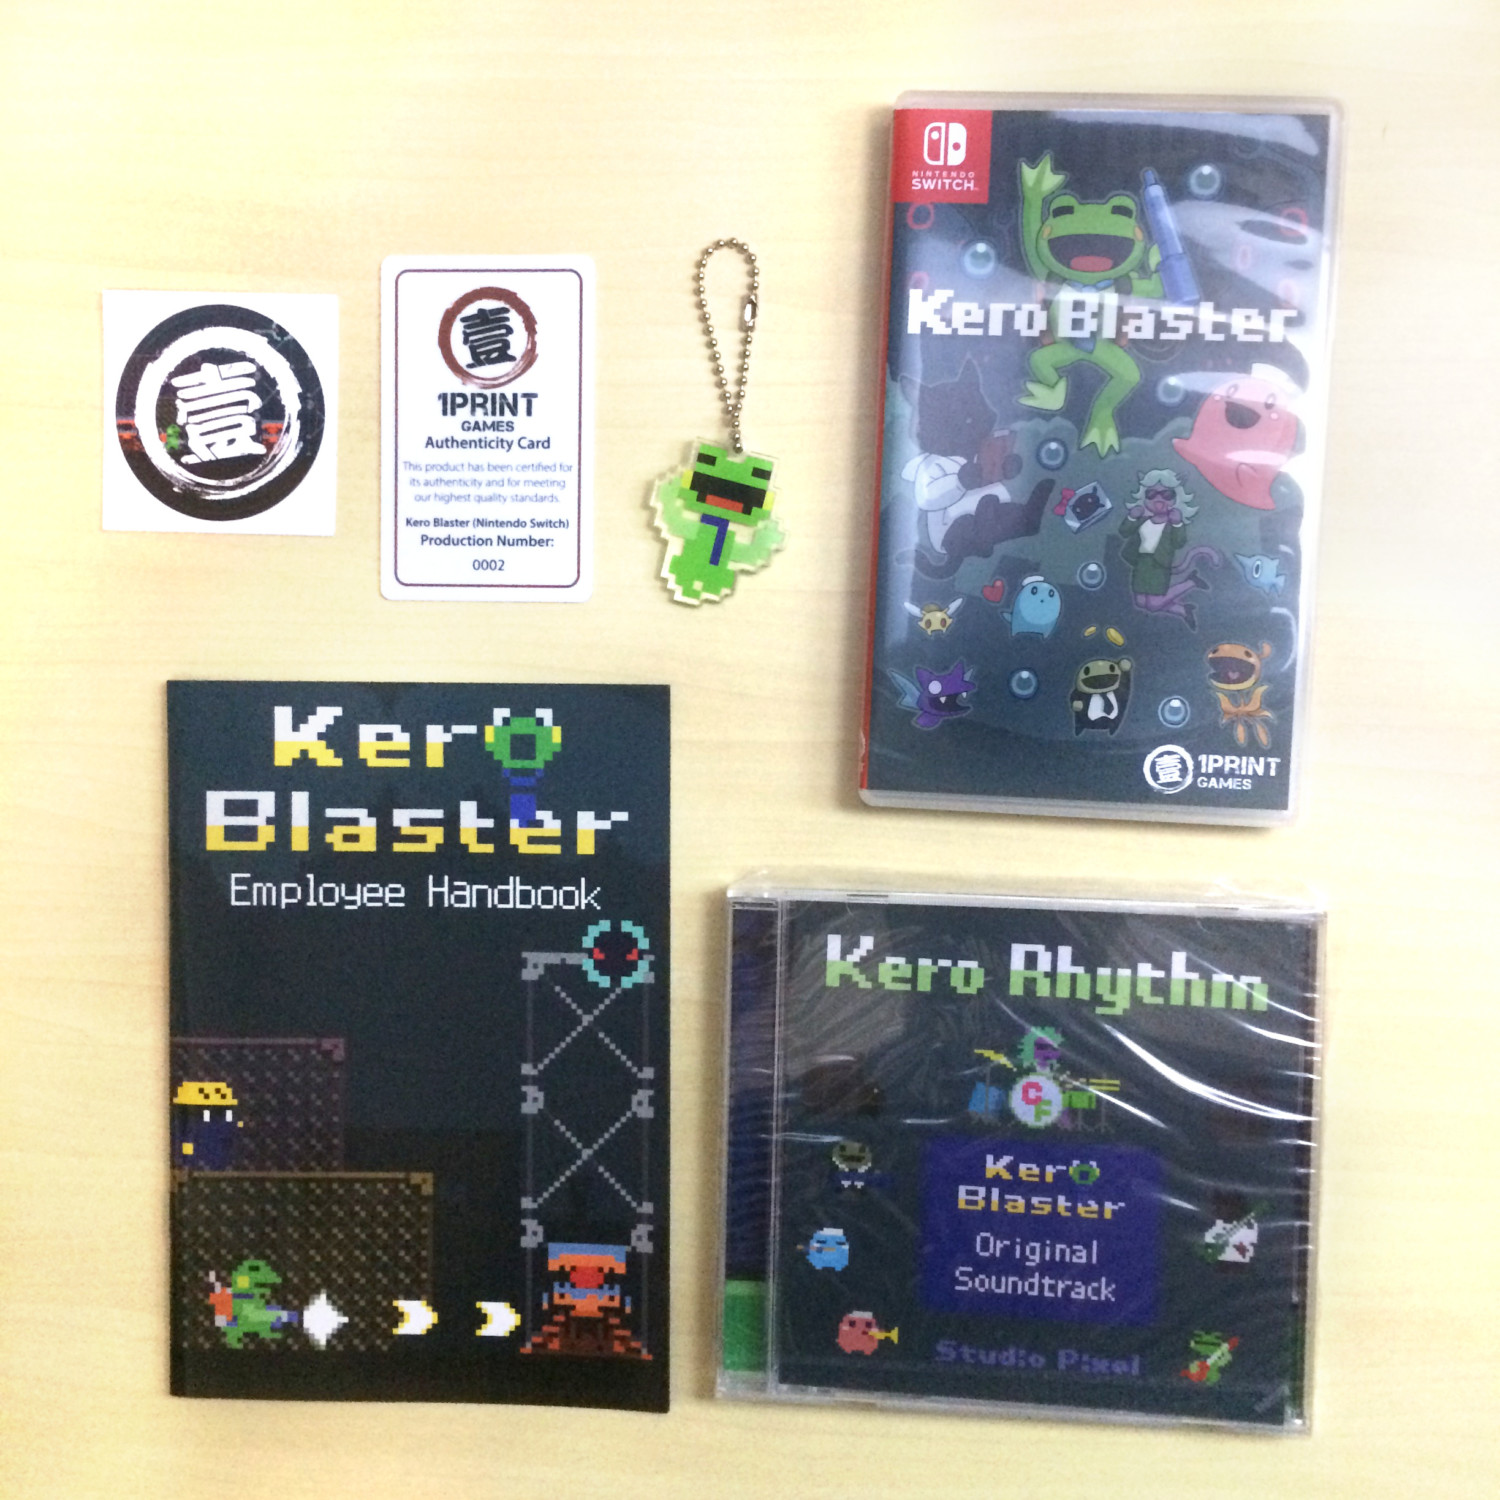 Unboxing Kero Blaster + Ittle Dew (Switch) from 1Print Games 